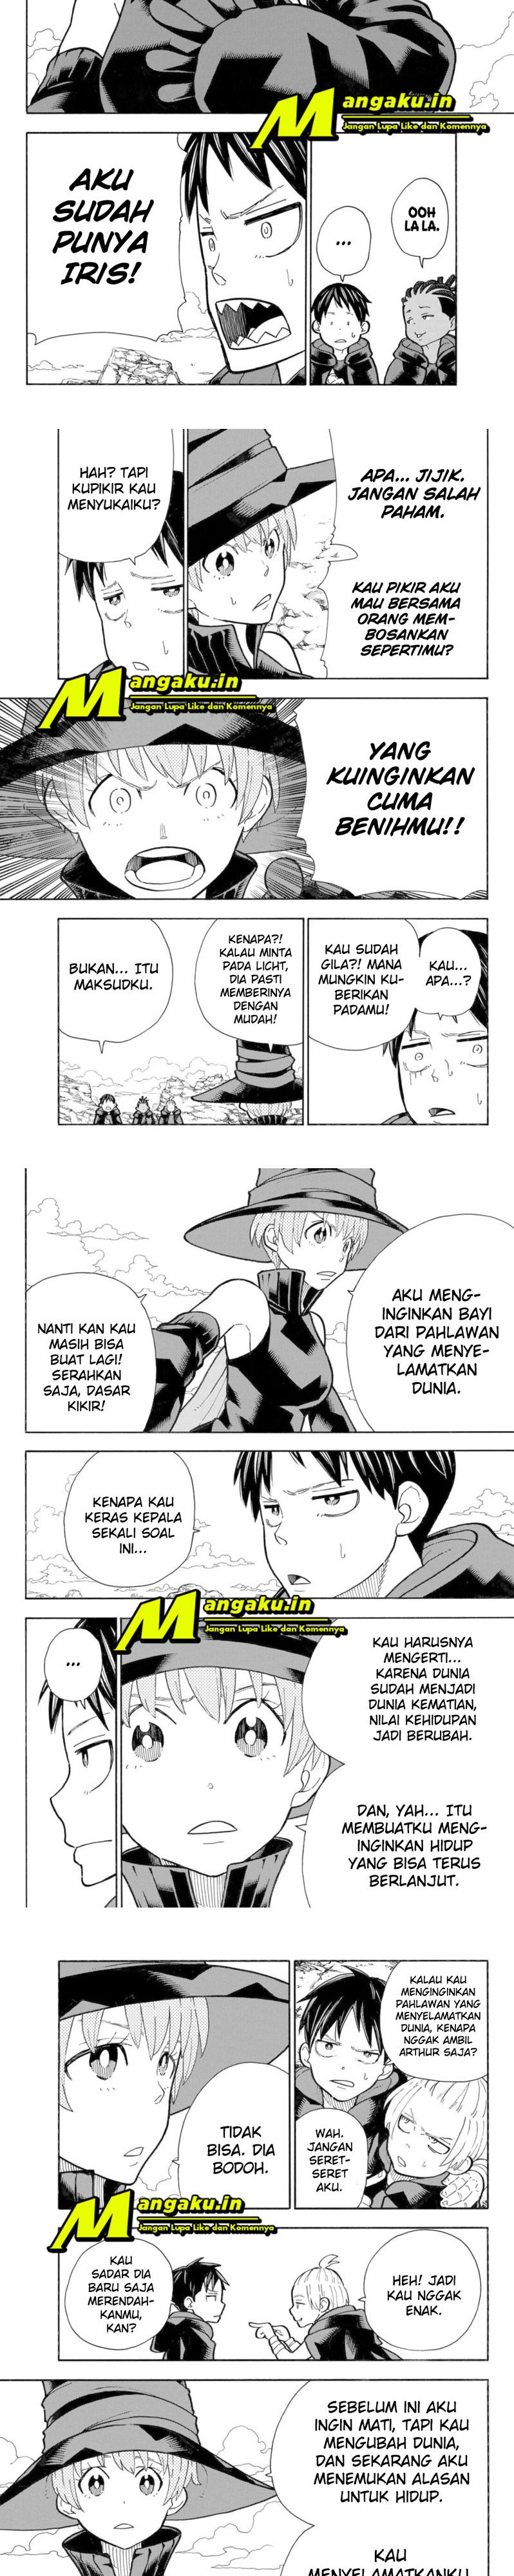 Fire Brigade of Flames Chapter 304